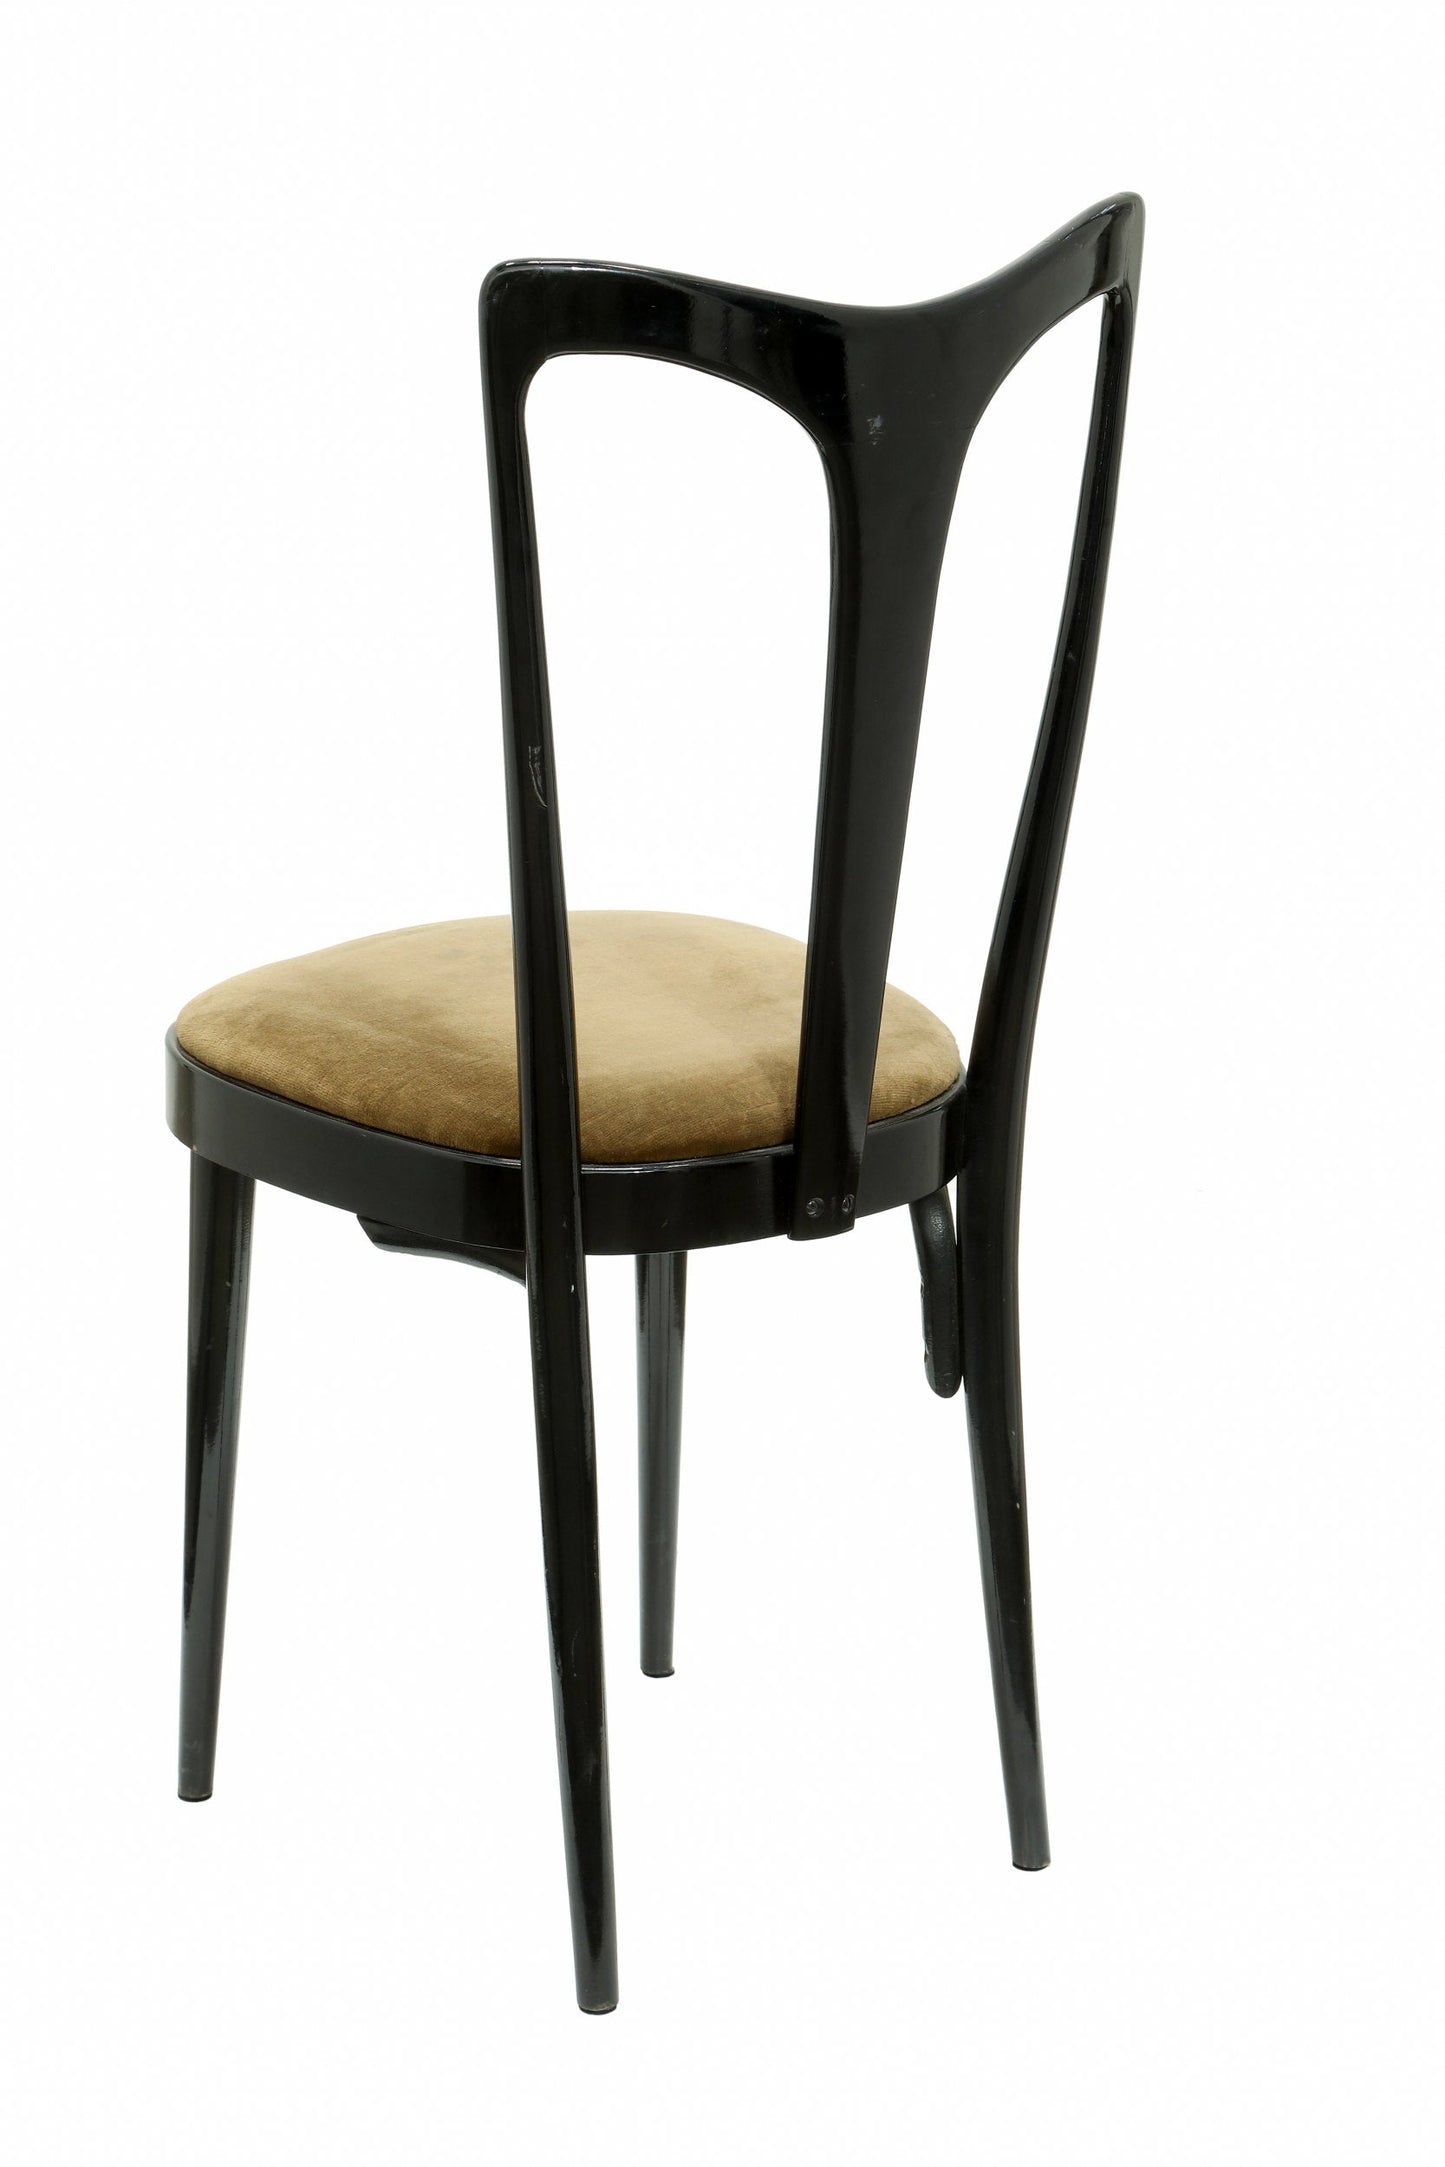 Six 1950s black lacquered chairs